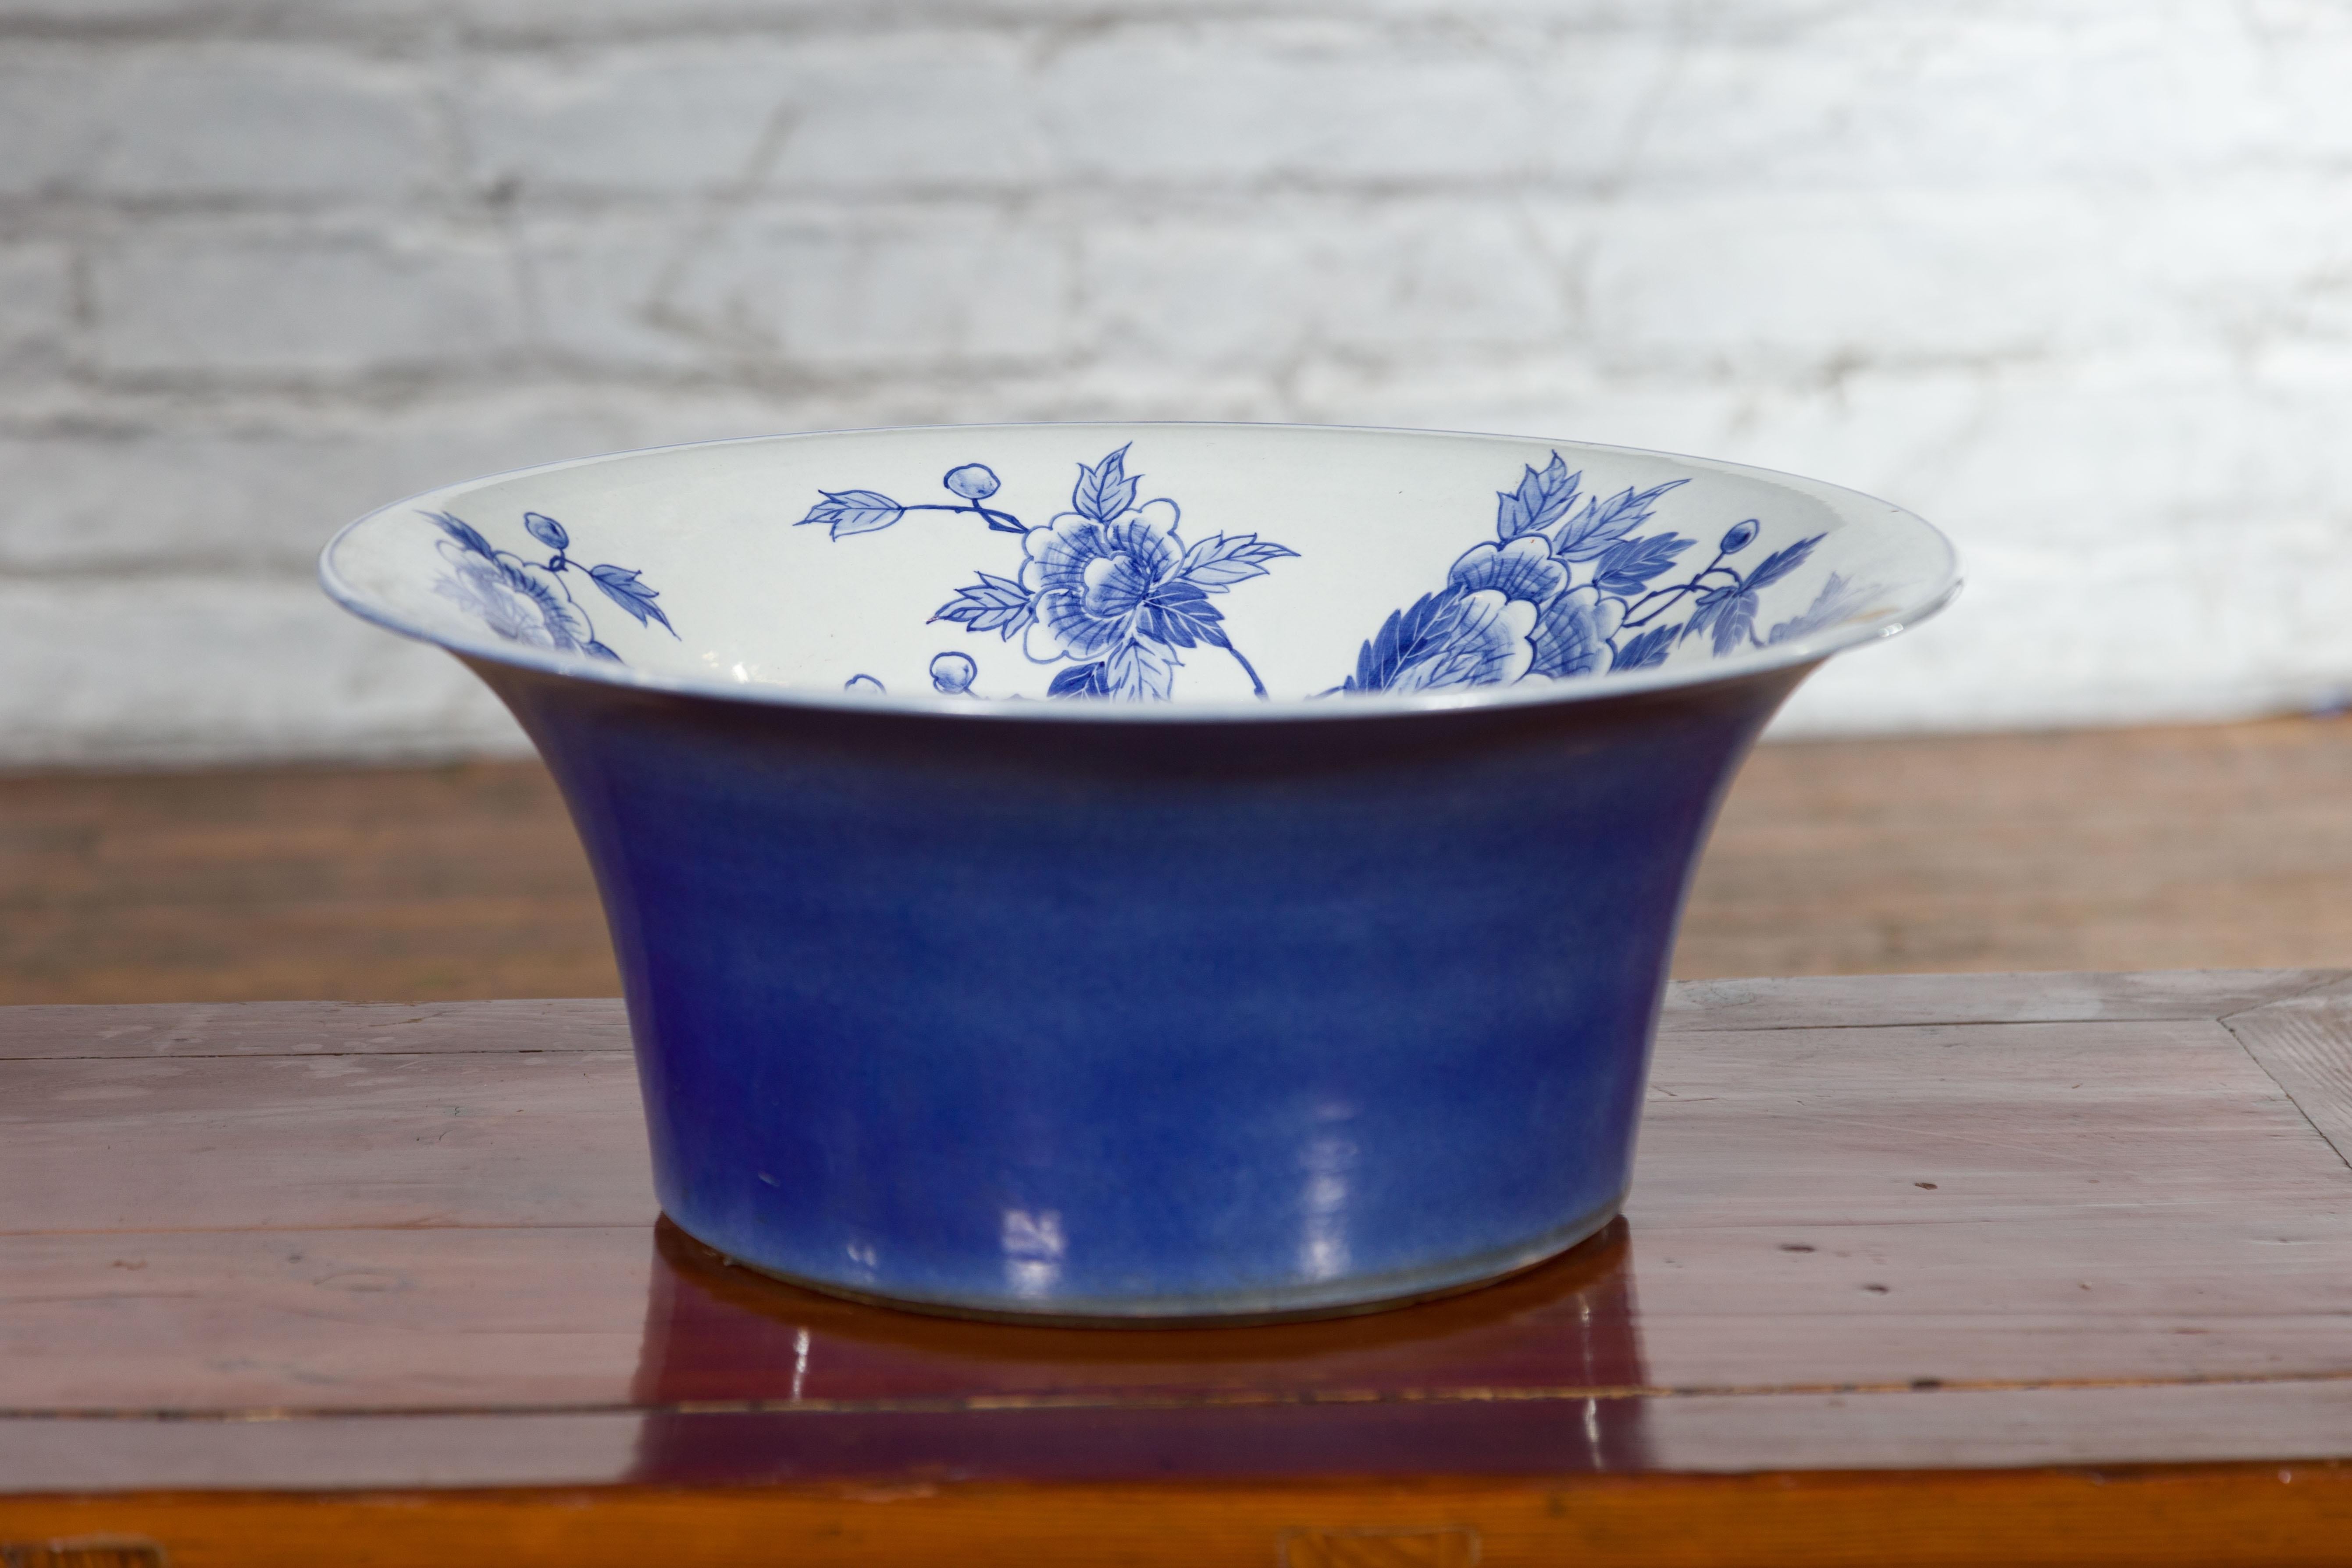 Chinese Blue and White Porcelain Wash Basin with Floral Motifs and Cobalt Blue For Sale 1